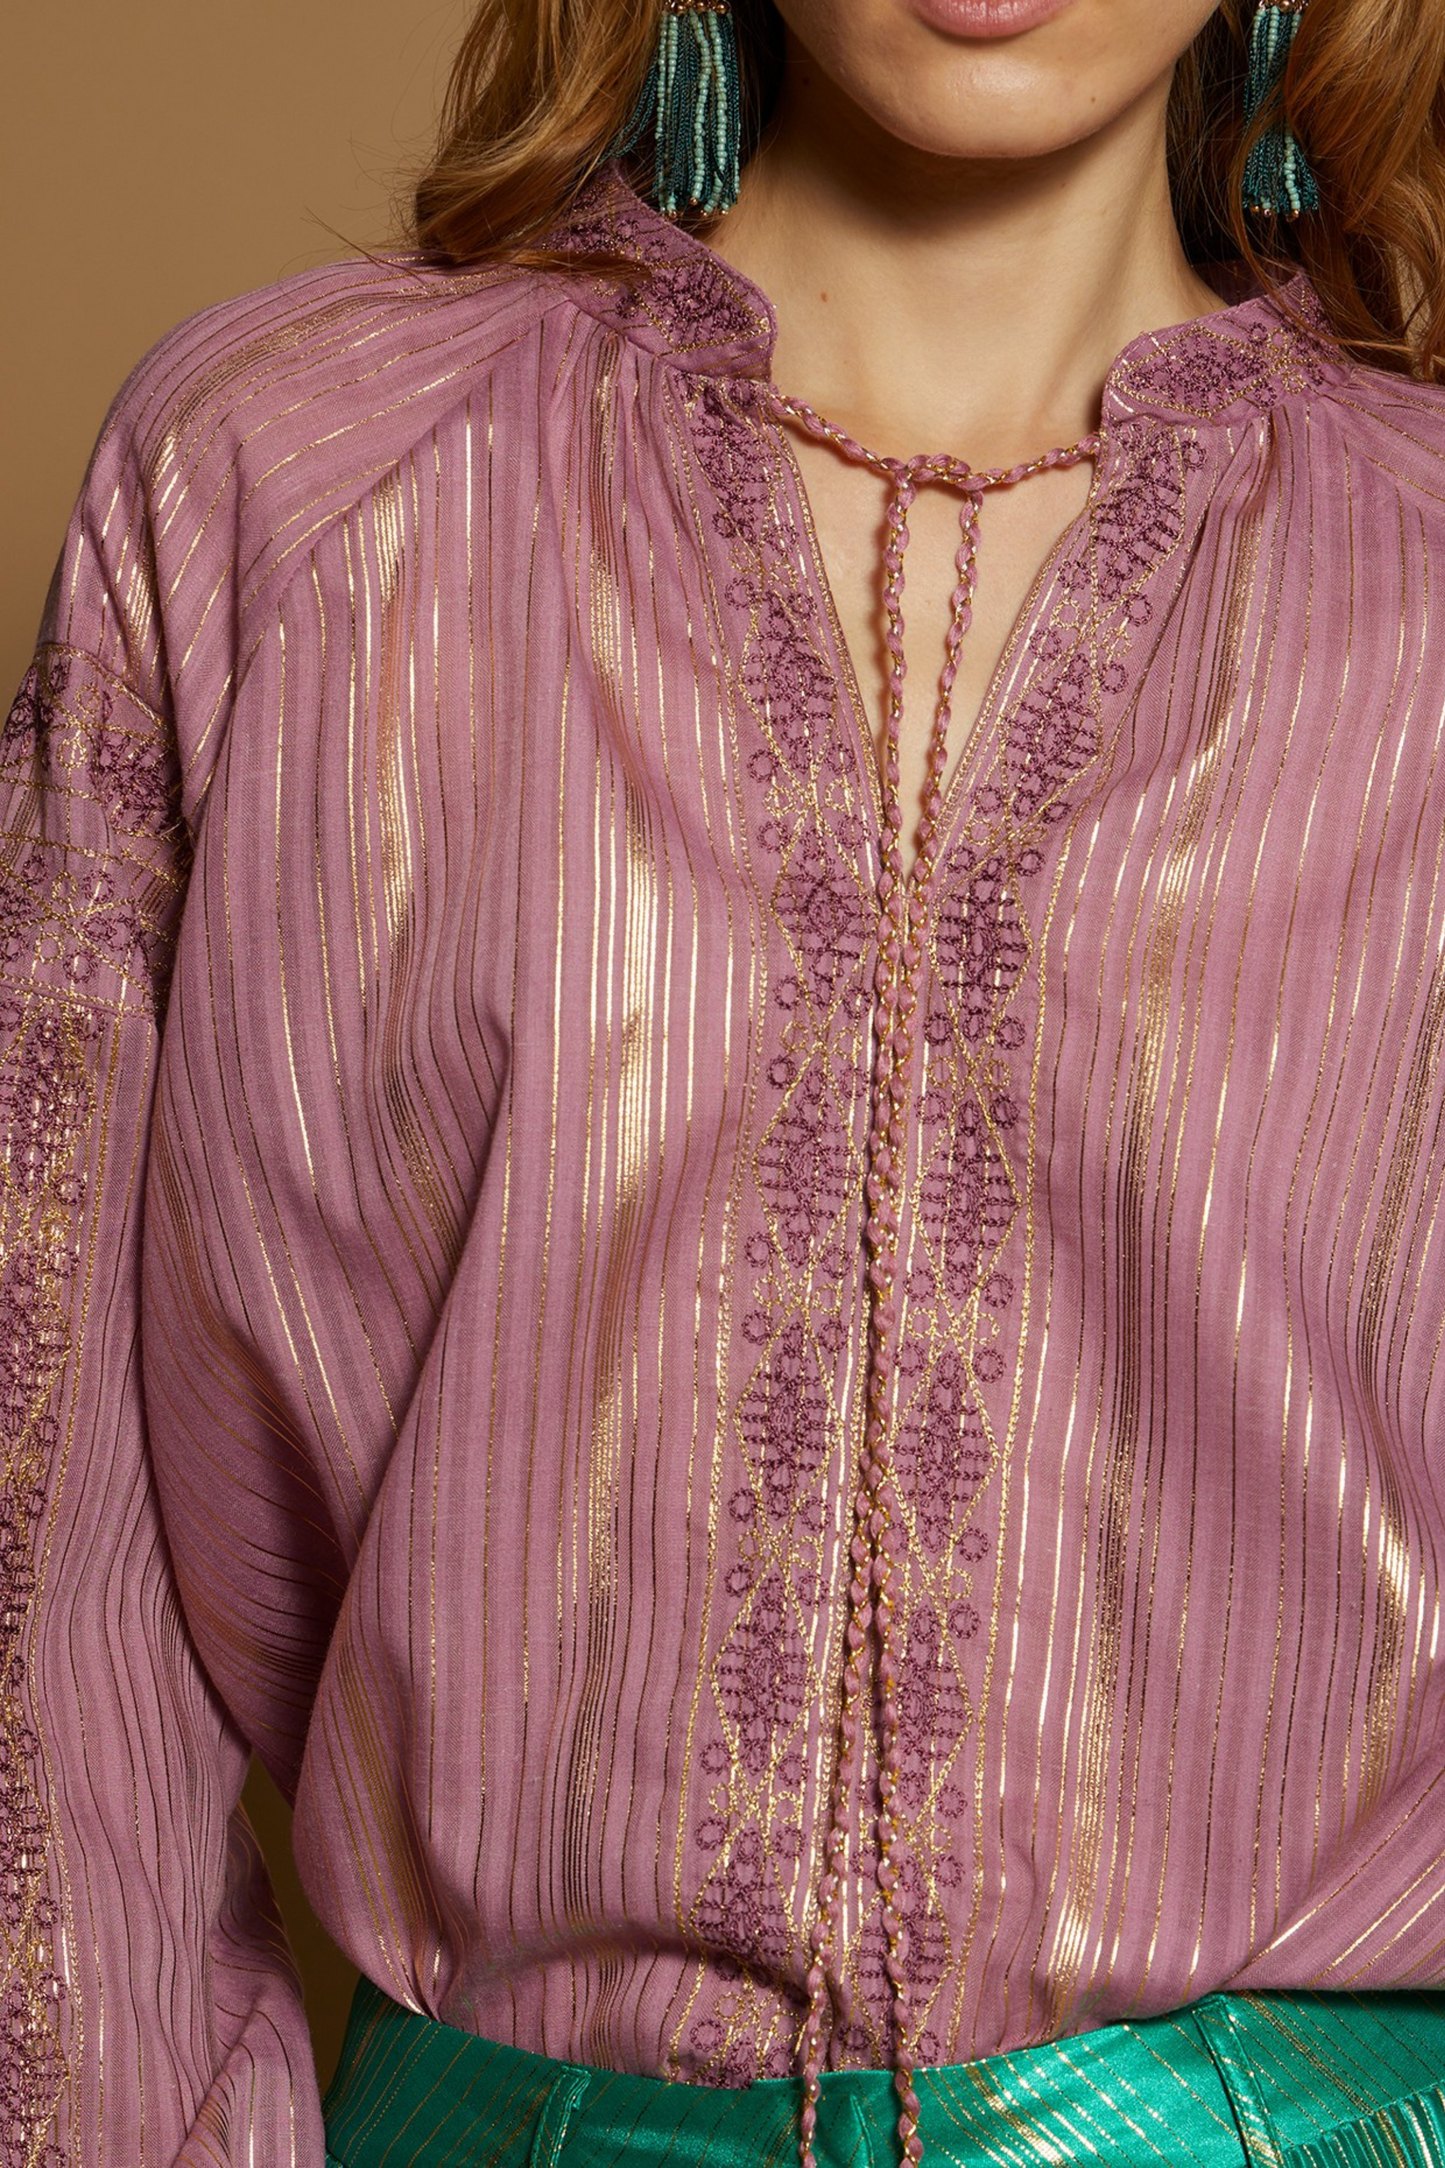 Dahlia & Gold Embroidered Blouse